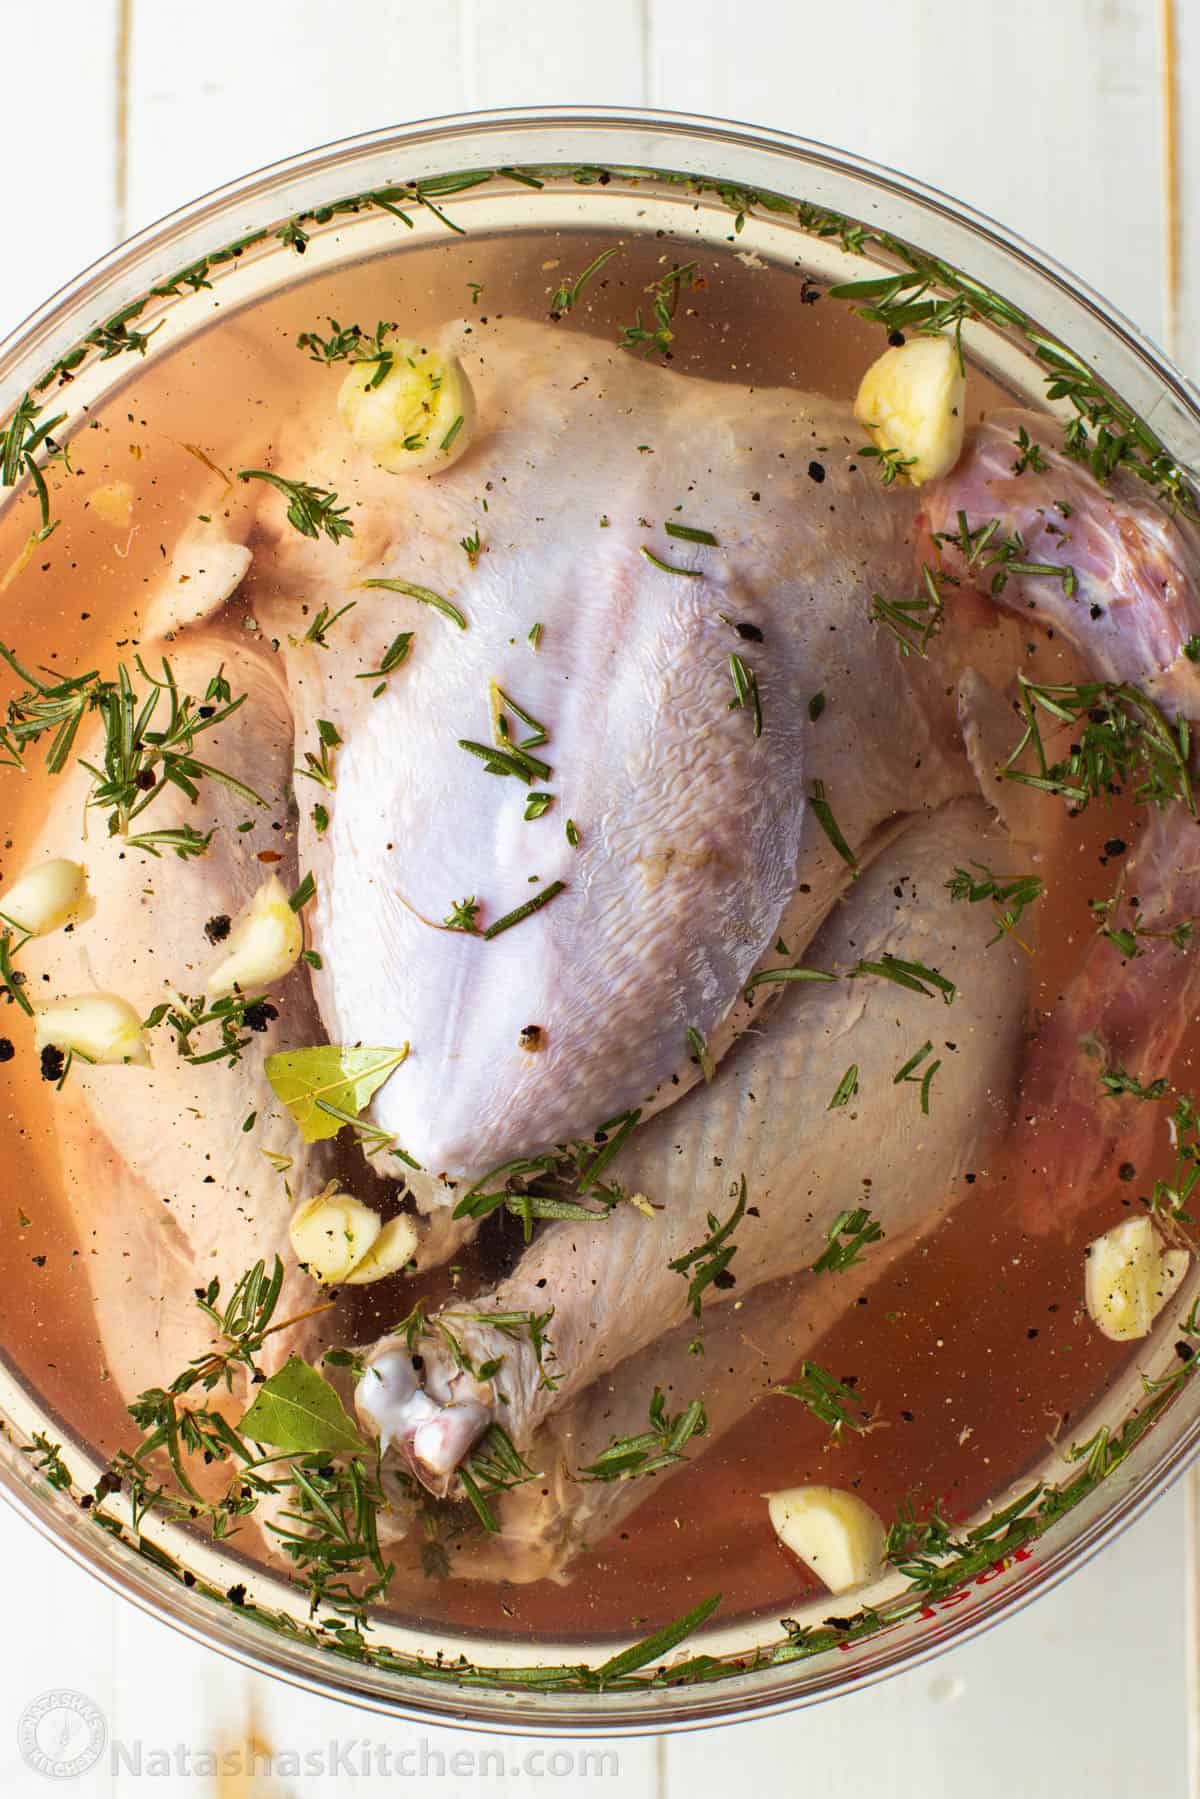 A whole turkey submerged in a salty brine with garlic and herbs